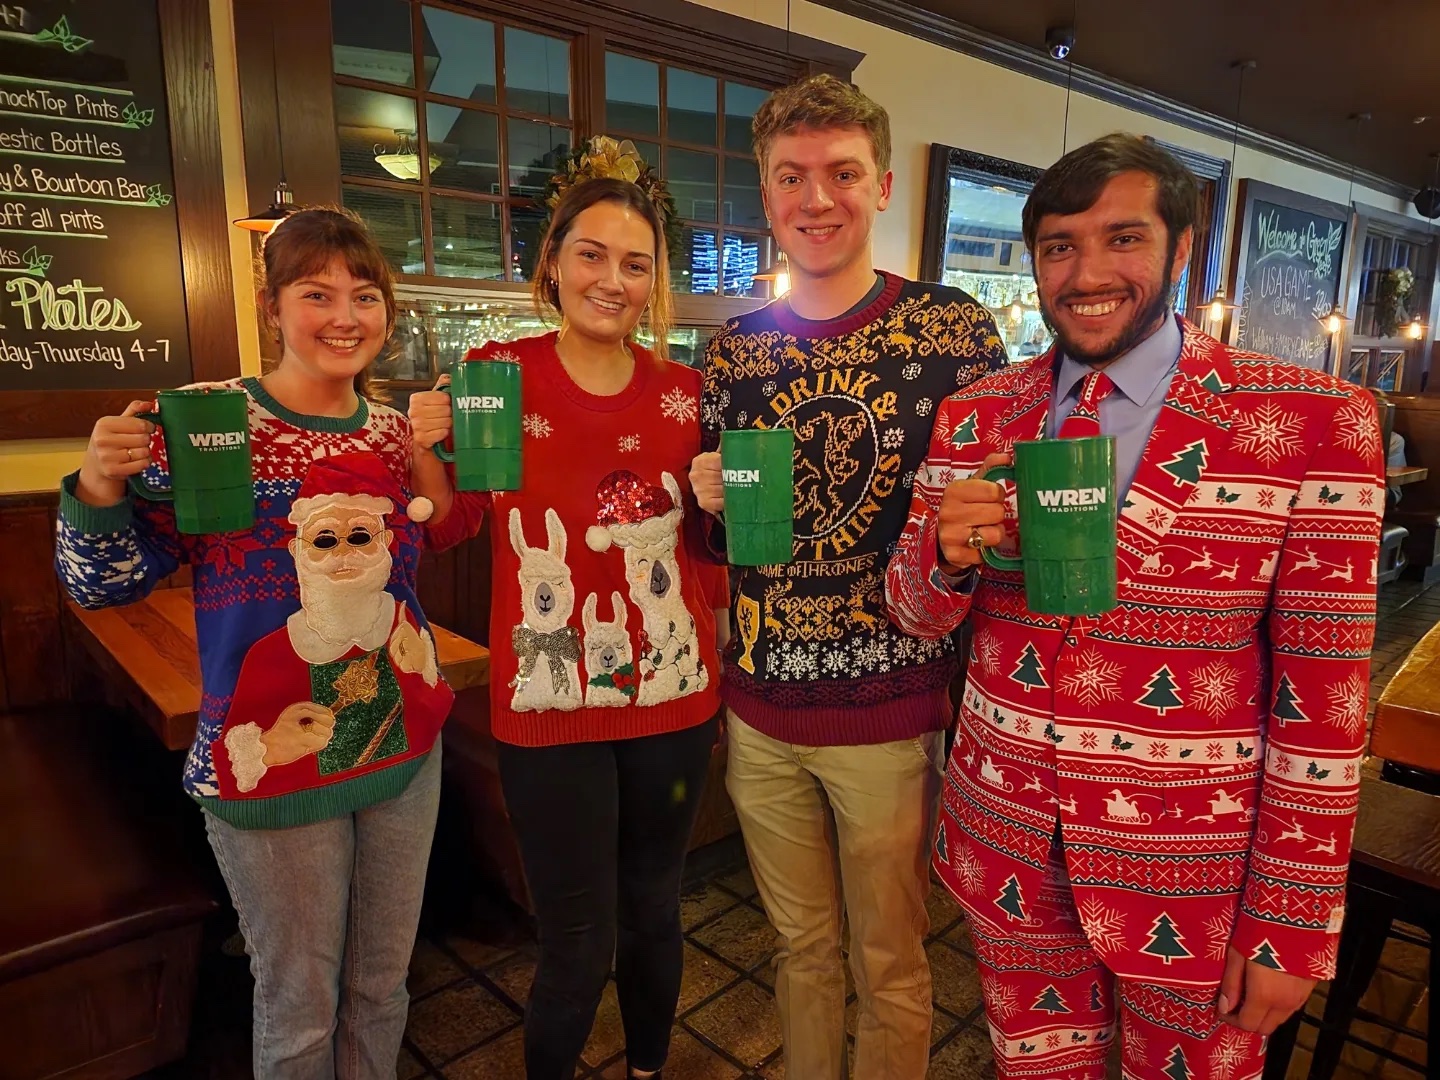 Members of the Class of 2023 with their Senior Class Gift mugs and wearing holiday clothes